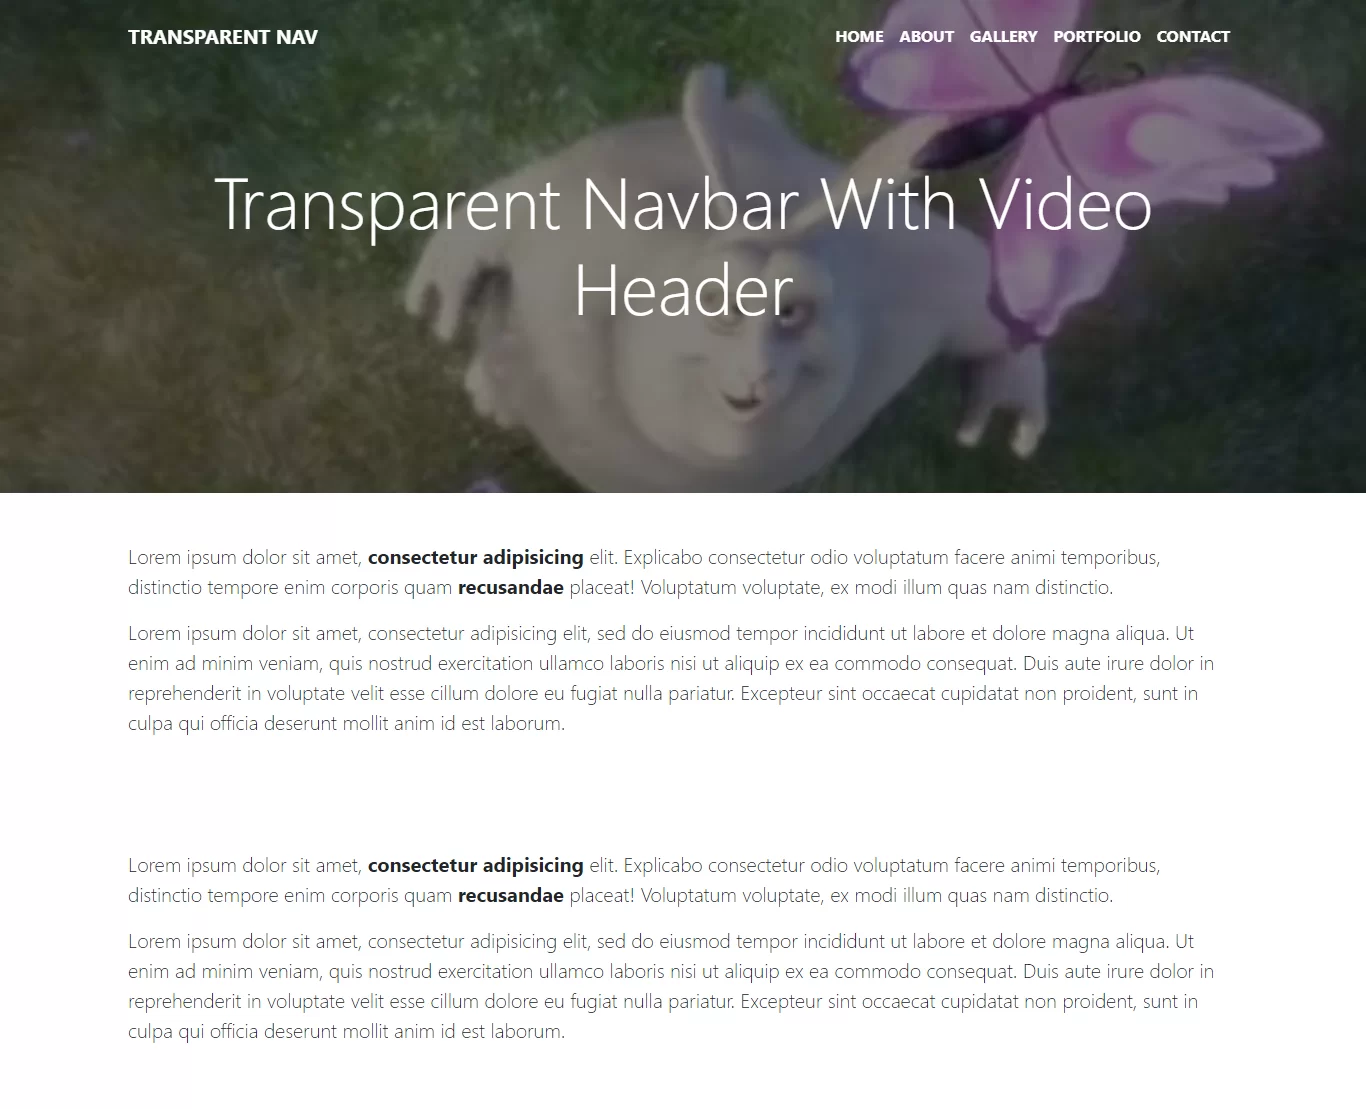 How To Create Transparent Navbar With Video Header Using CSS